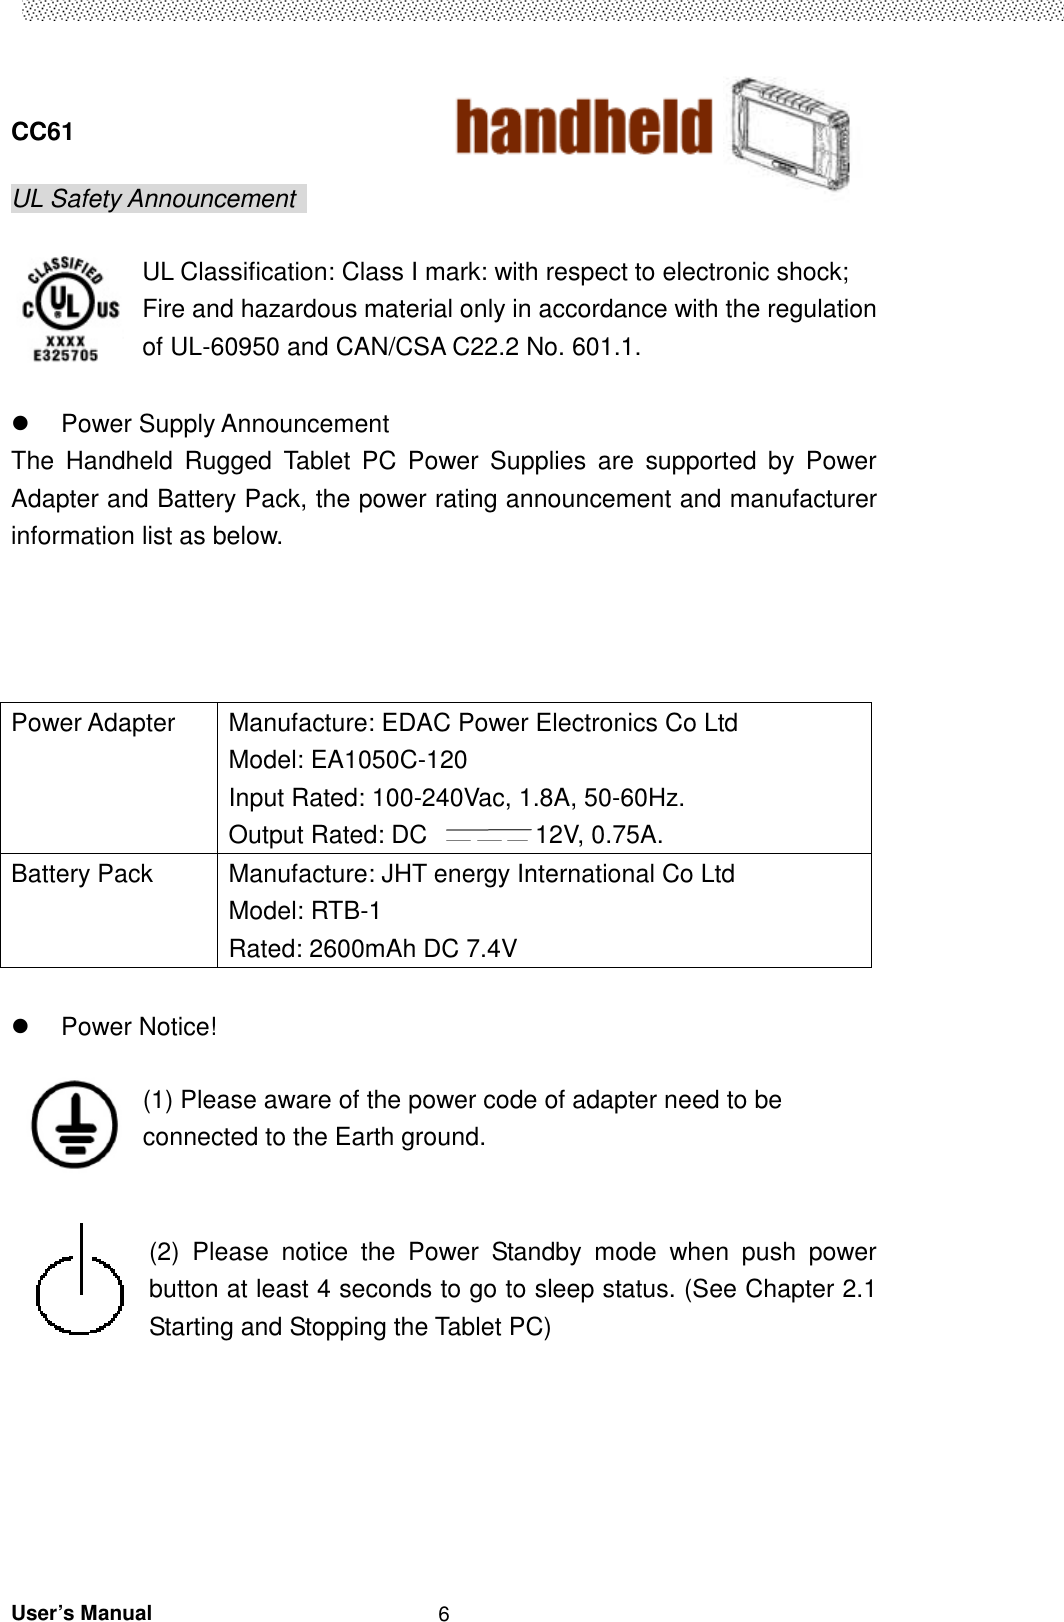  CC61                                       User’s Manual                                                   6 UL Safety Announcement    UL Classification: Class I mark: with respect to electronic shock; Fire and hazardous material only in accordance with the regulation of UL-60950 and CAN/CSA C22.2 No. 601.1.    Power Supply Announcement The  Handheld  Rugged  Tablet  PC  Power  Supplies  are  supported  by  Power Adapter and Battery Pack, the power rating announcement and manufacturer information list as below.        Power Notice!    (1) Please aware of the power code of adapter need to be connected to the Earth ground.   (2)  Please  notice  the  Power  Standby  mode  when  push  power button at least 4 seconds to go to sleep status. (See Chapter 2.1 Starting and Stopping the Tablet PC)       Power Adapter  Manufacture: EDAC Power Electronics Co Ltd Model: EA1050C-120 Input Rated: 100-240Vac, 1.8A, 50-60Hz. Output Rated: DC  12V, 0.75A. Battery Pack  Manufacture: JHT energy International Co Ltd Model: RTB-1 Rated: 2600mAh DC 7.4V 